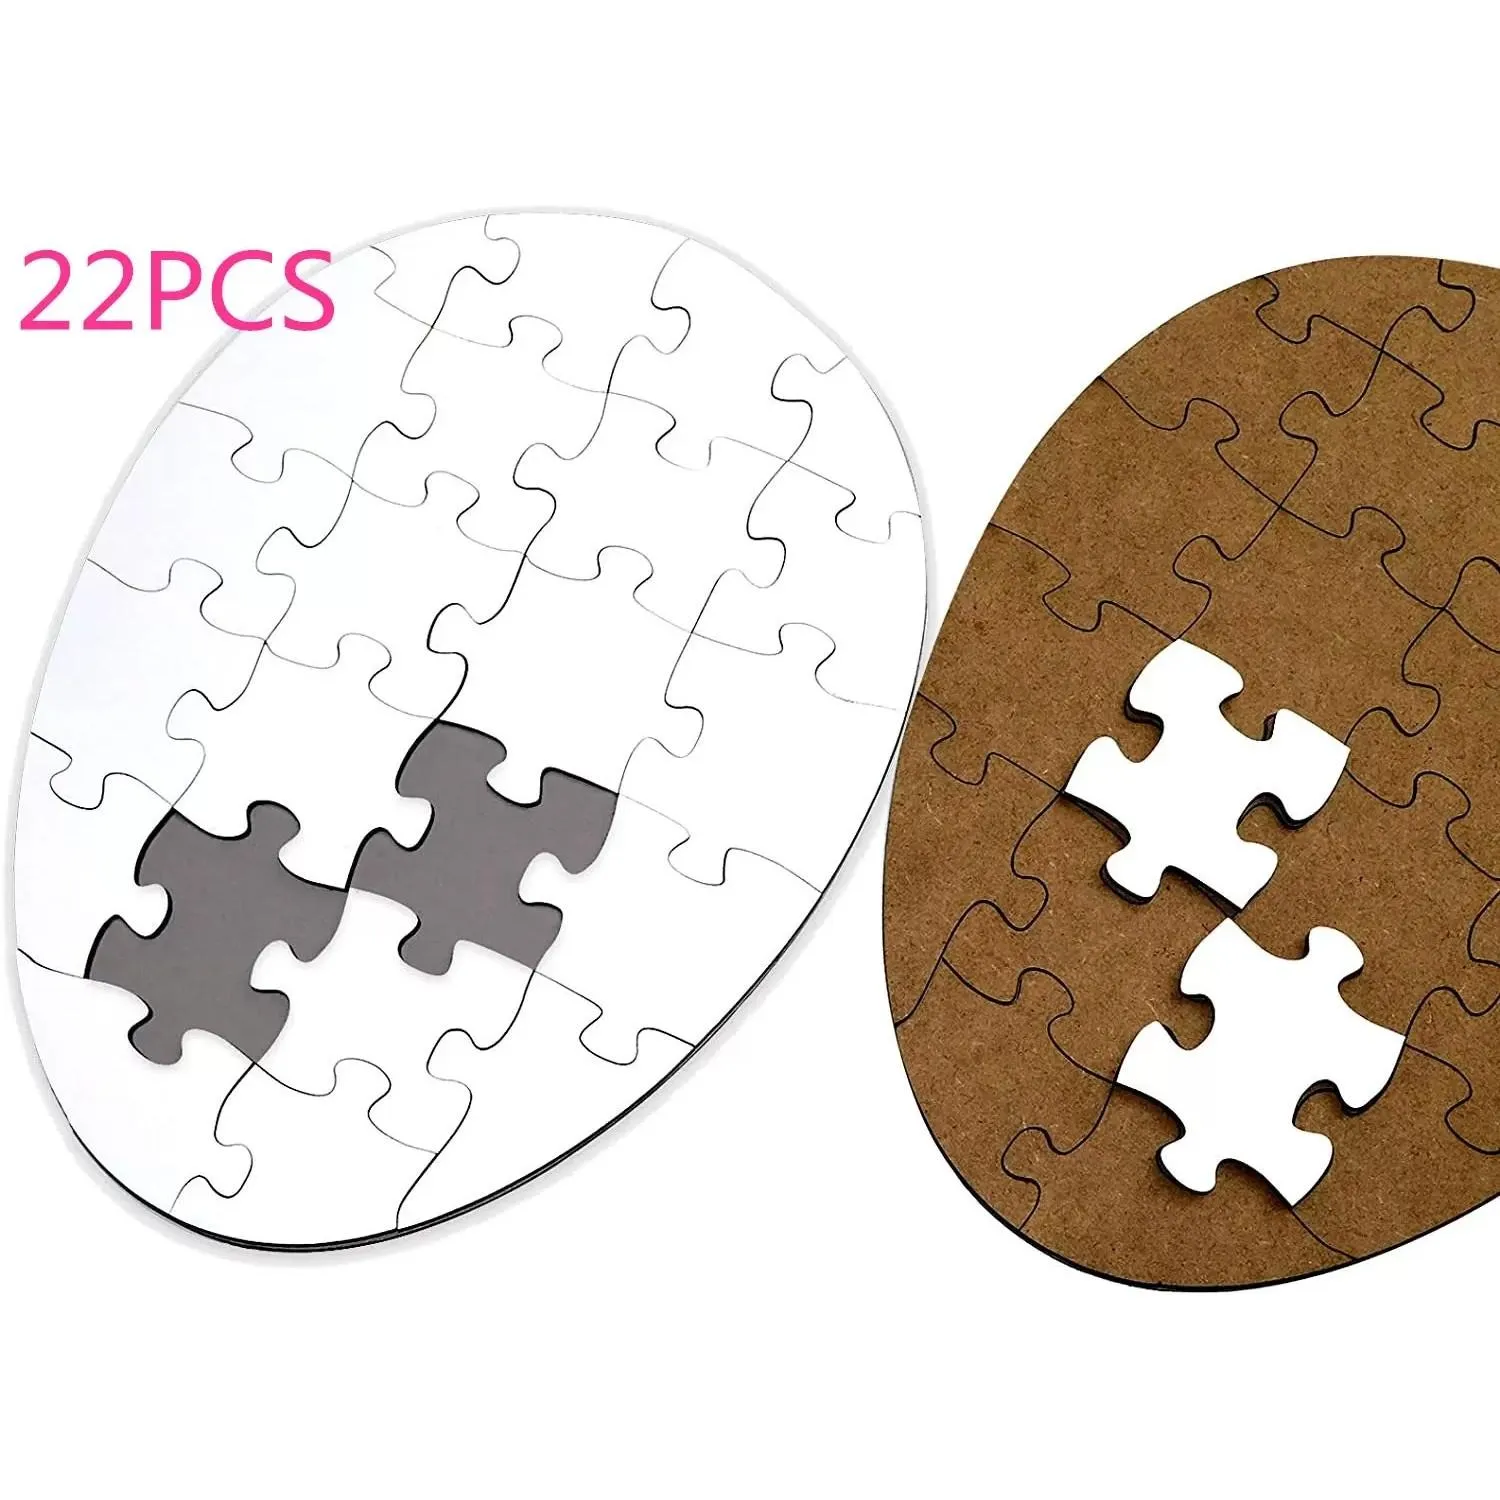 DHL Easter Egg Oval Shape Party Wood Blank Sublimation Puzzle DIY Heat Press Trasfer MDF Blank Jigsaw Decoration FY3568 C0121